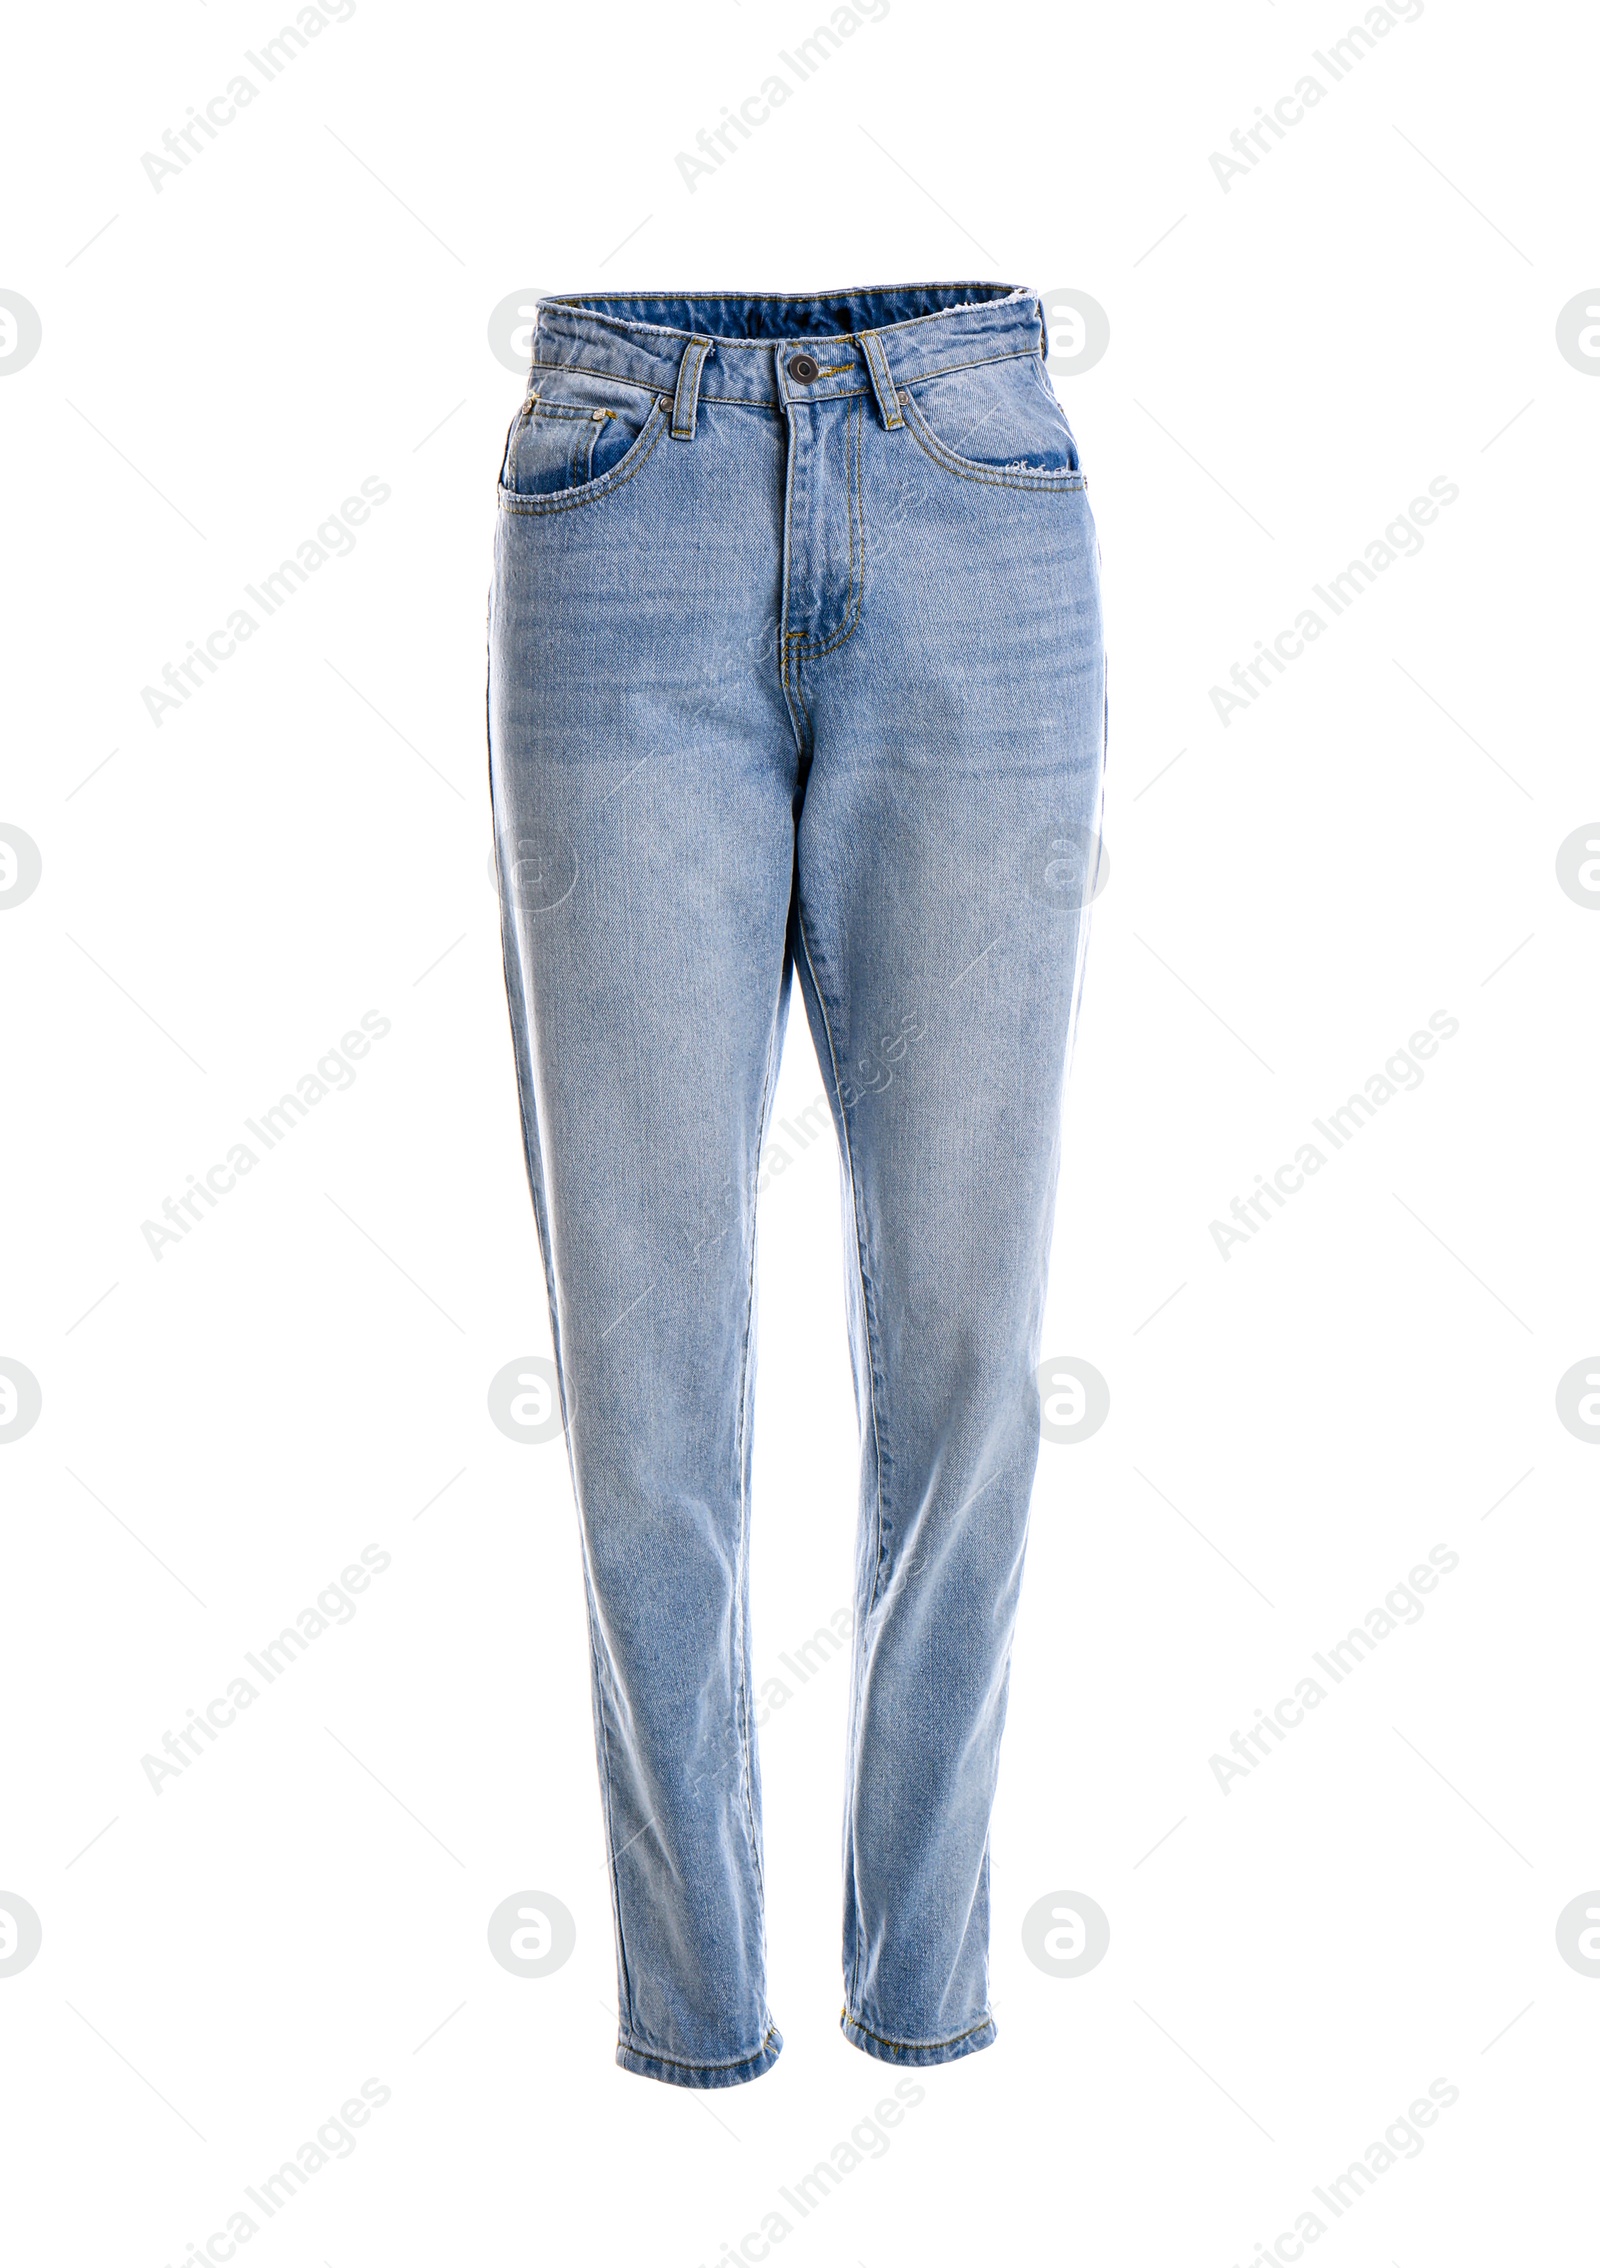 Photo of Stylish jeans on mannequin against white background. Women's clothes